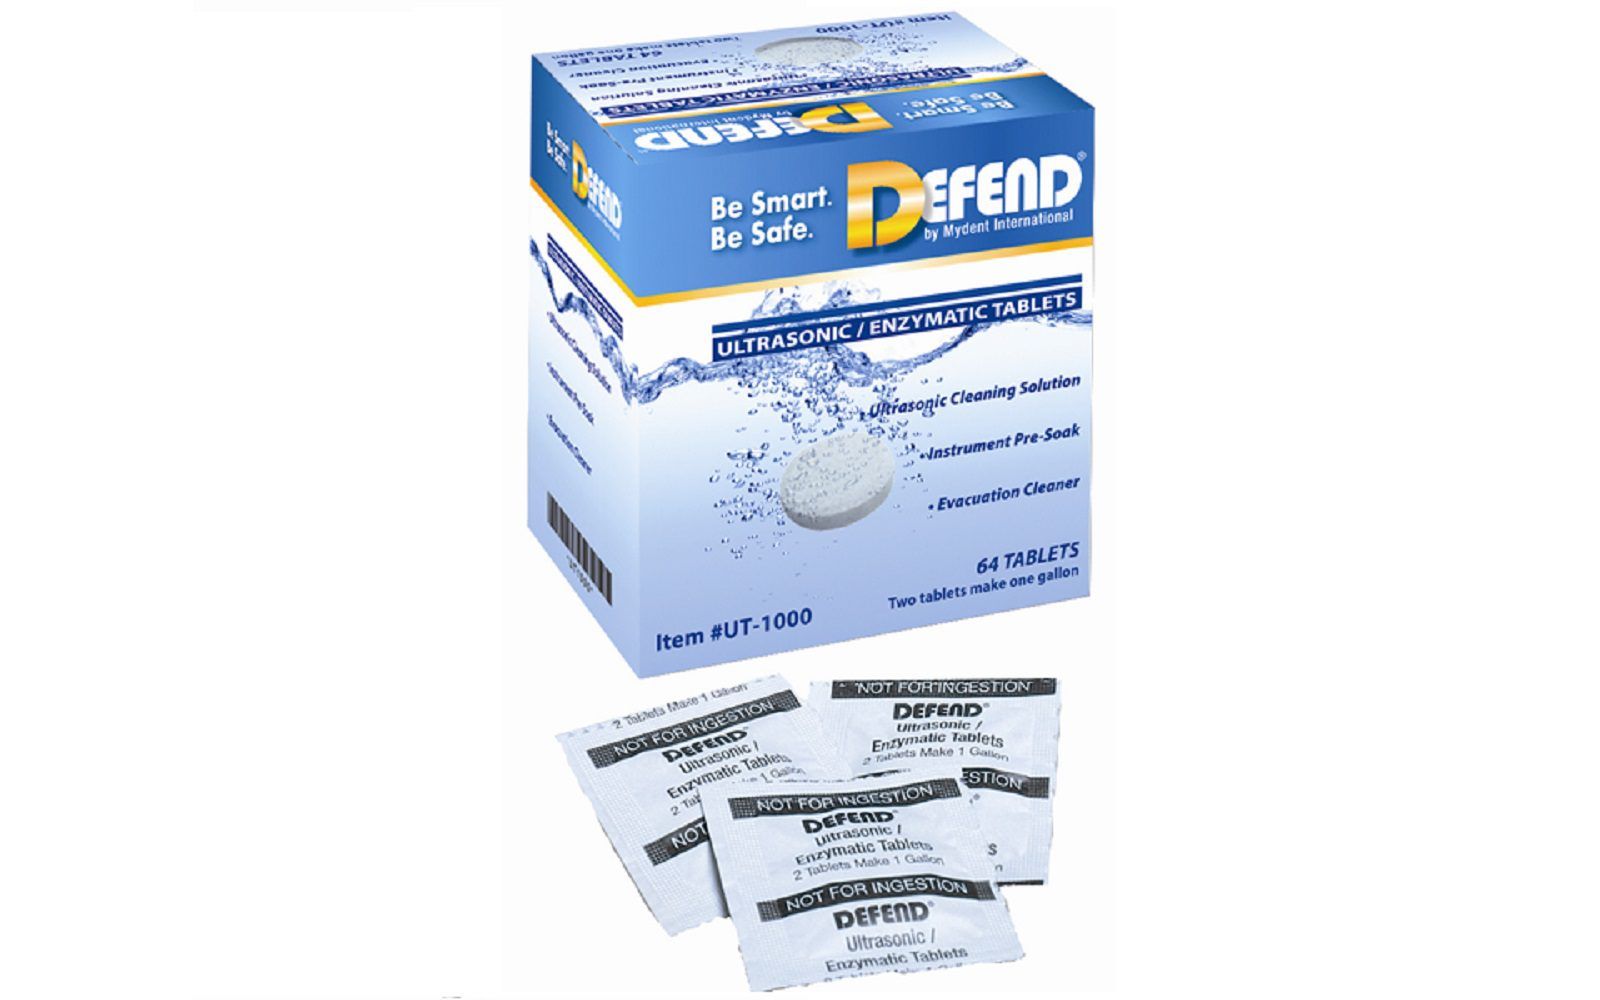 Mydent-defend-enzymatic-cleaning-tablets